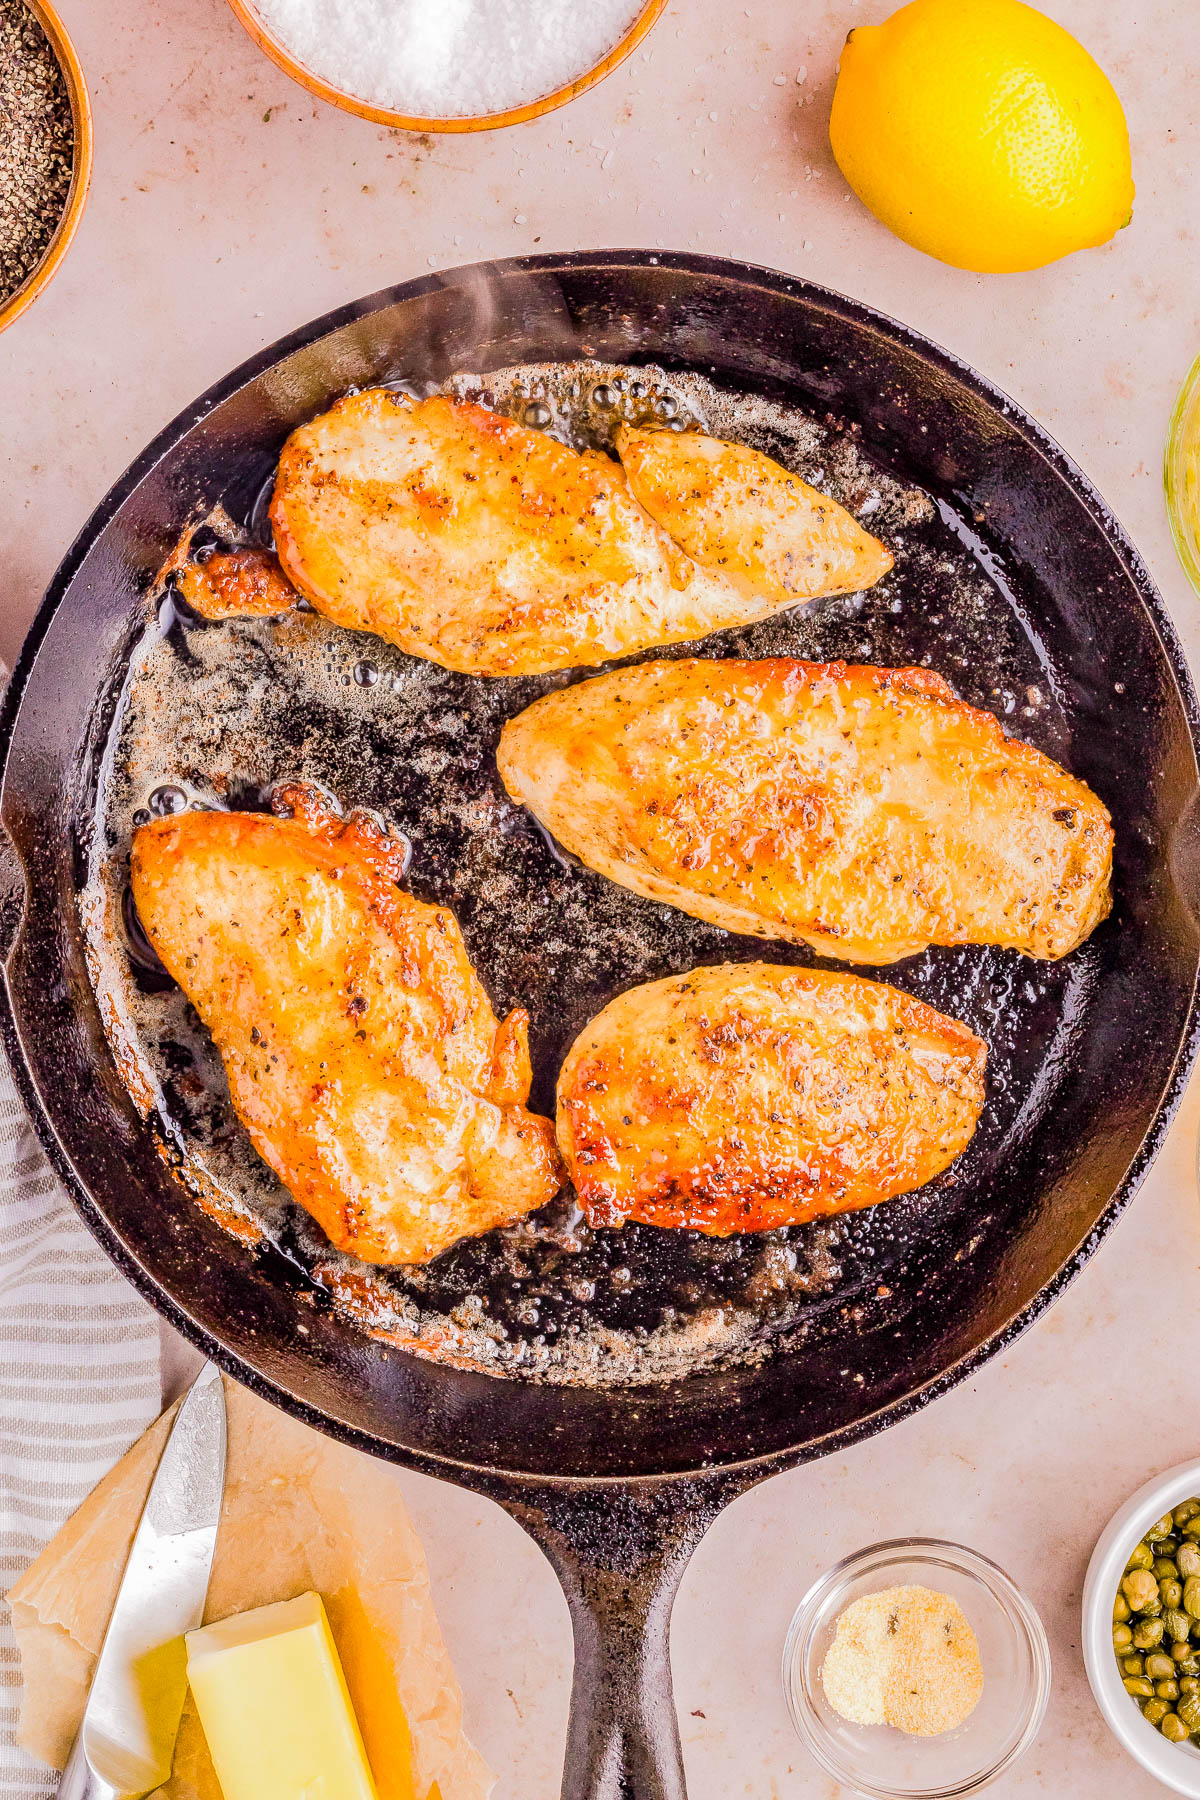 Chicken breasts being cooked in a cast iron skillet.